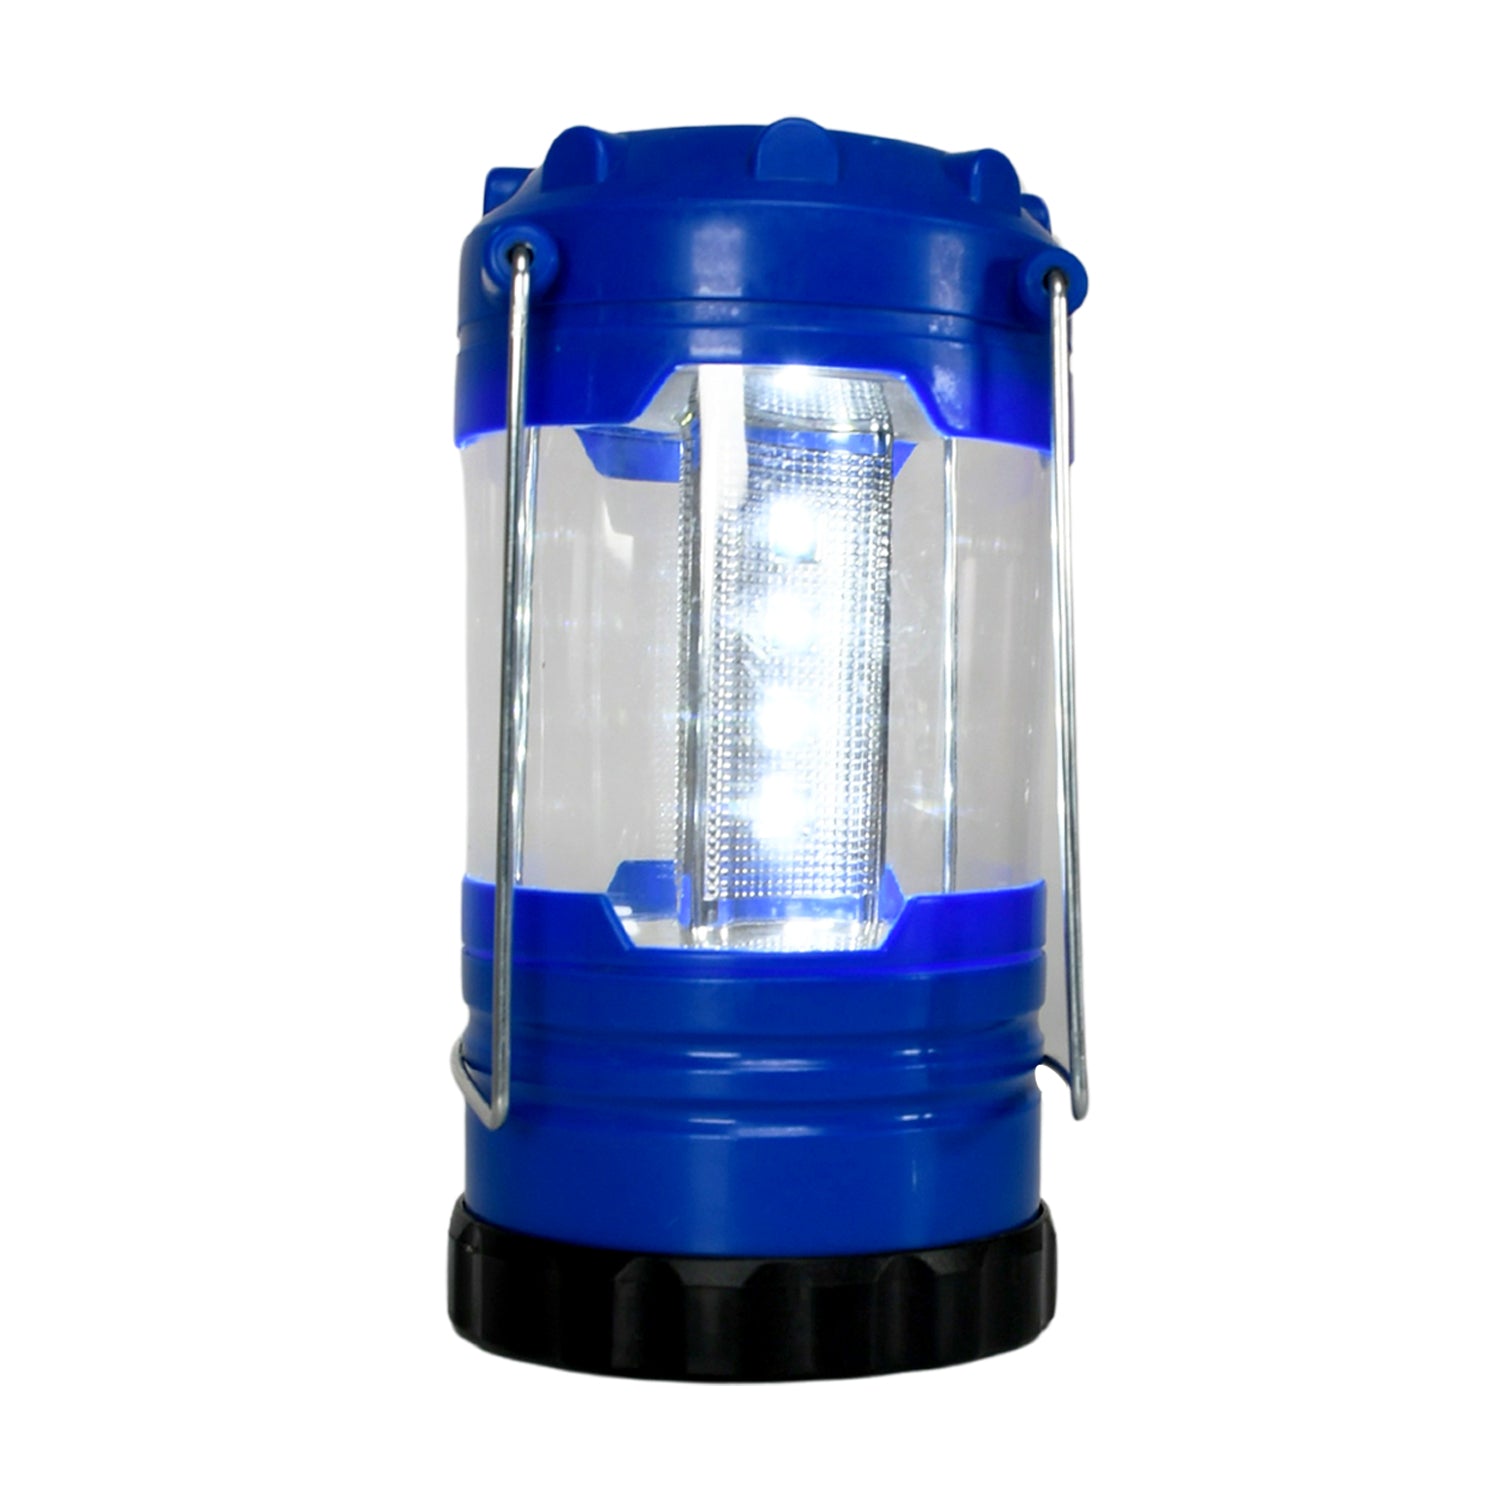 12690 Camping Lanterns, White Light Safe Durable Tent Light Portable and Lightweight for Hiking Night Fishing for Camping, Waterproof Battery, Battery operated Light (Battery Not Included)